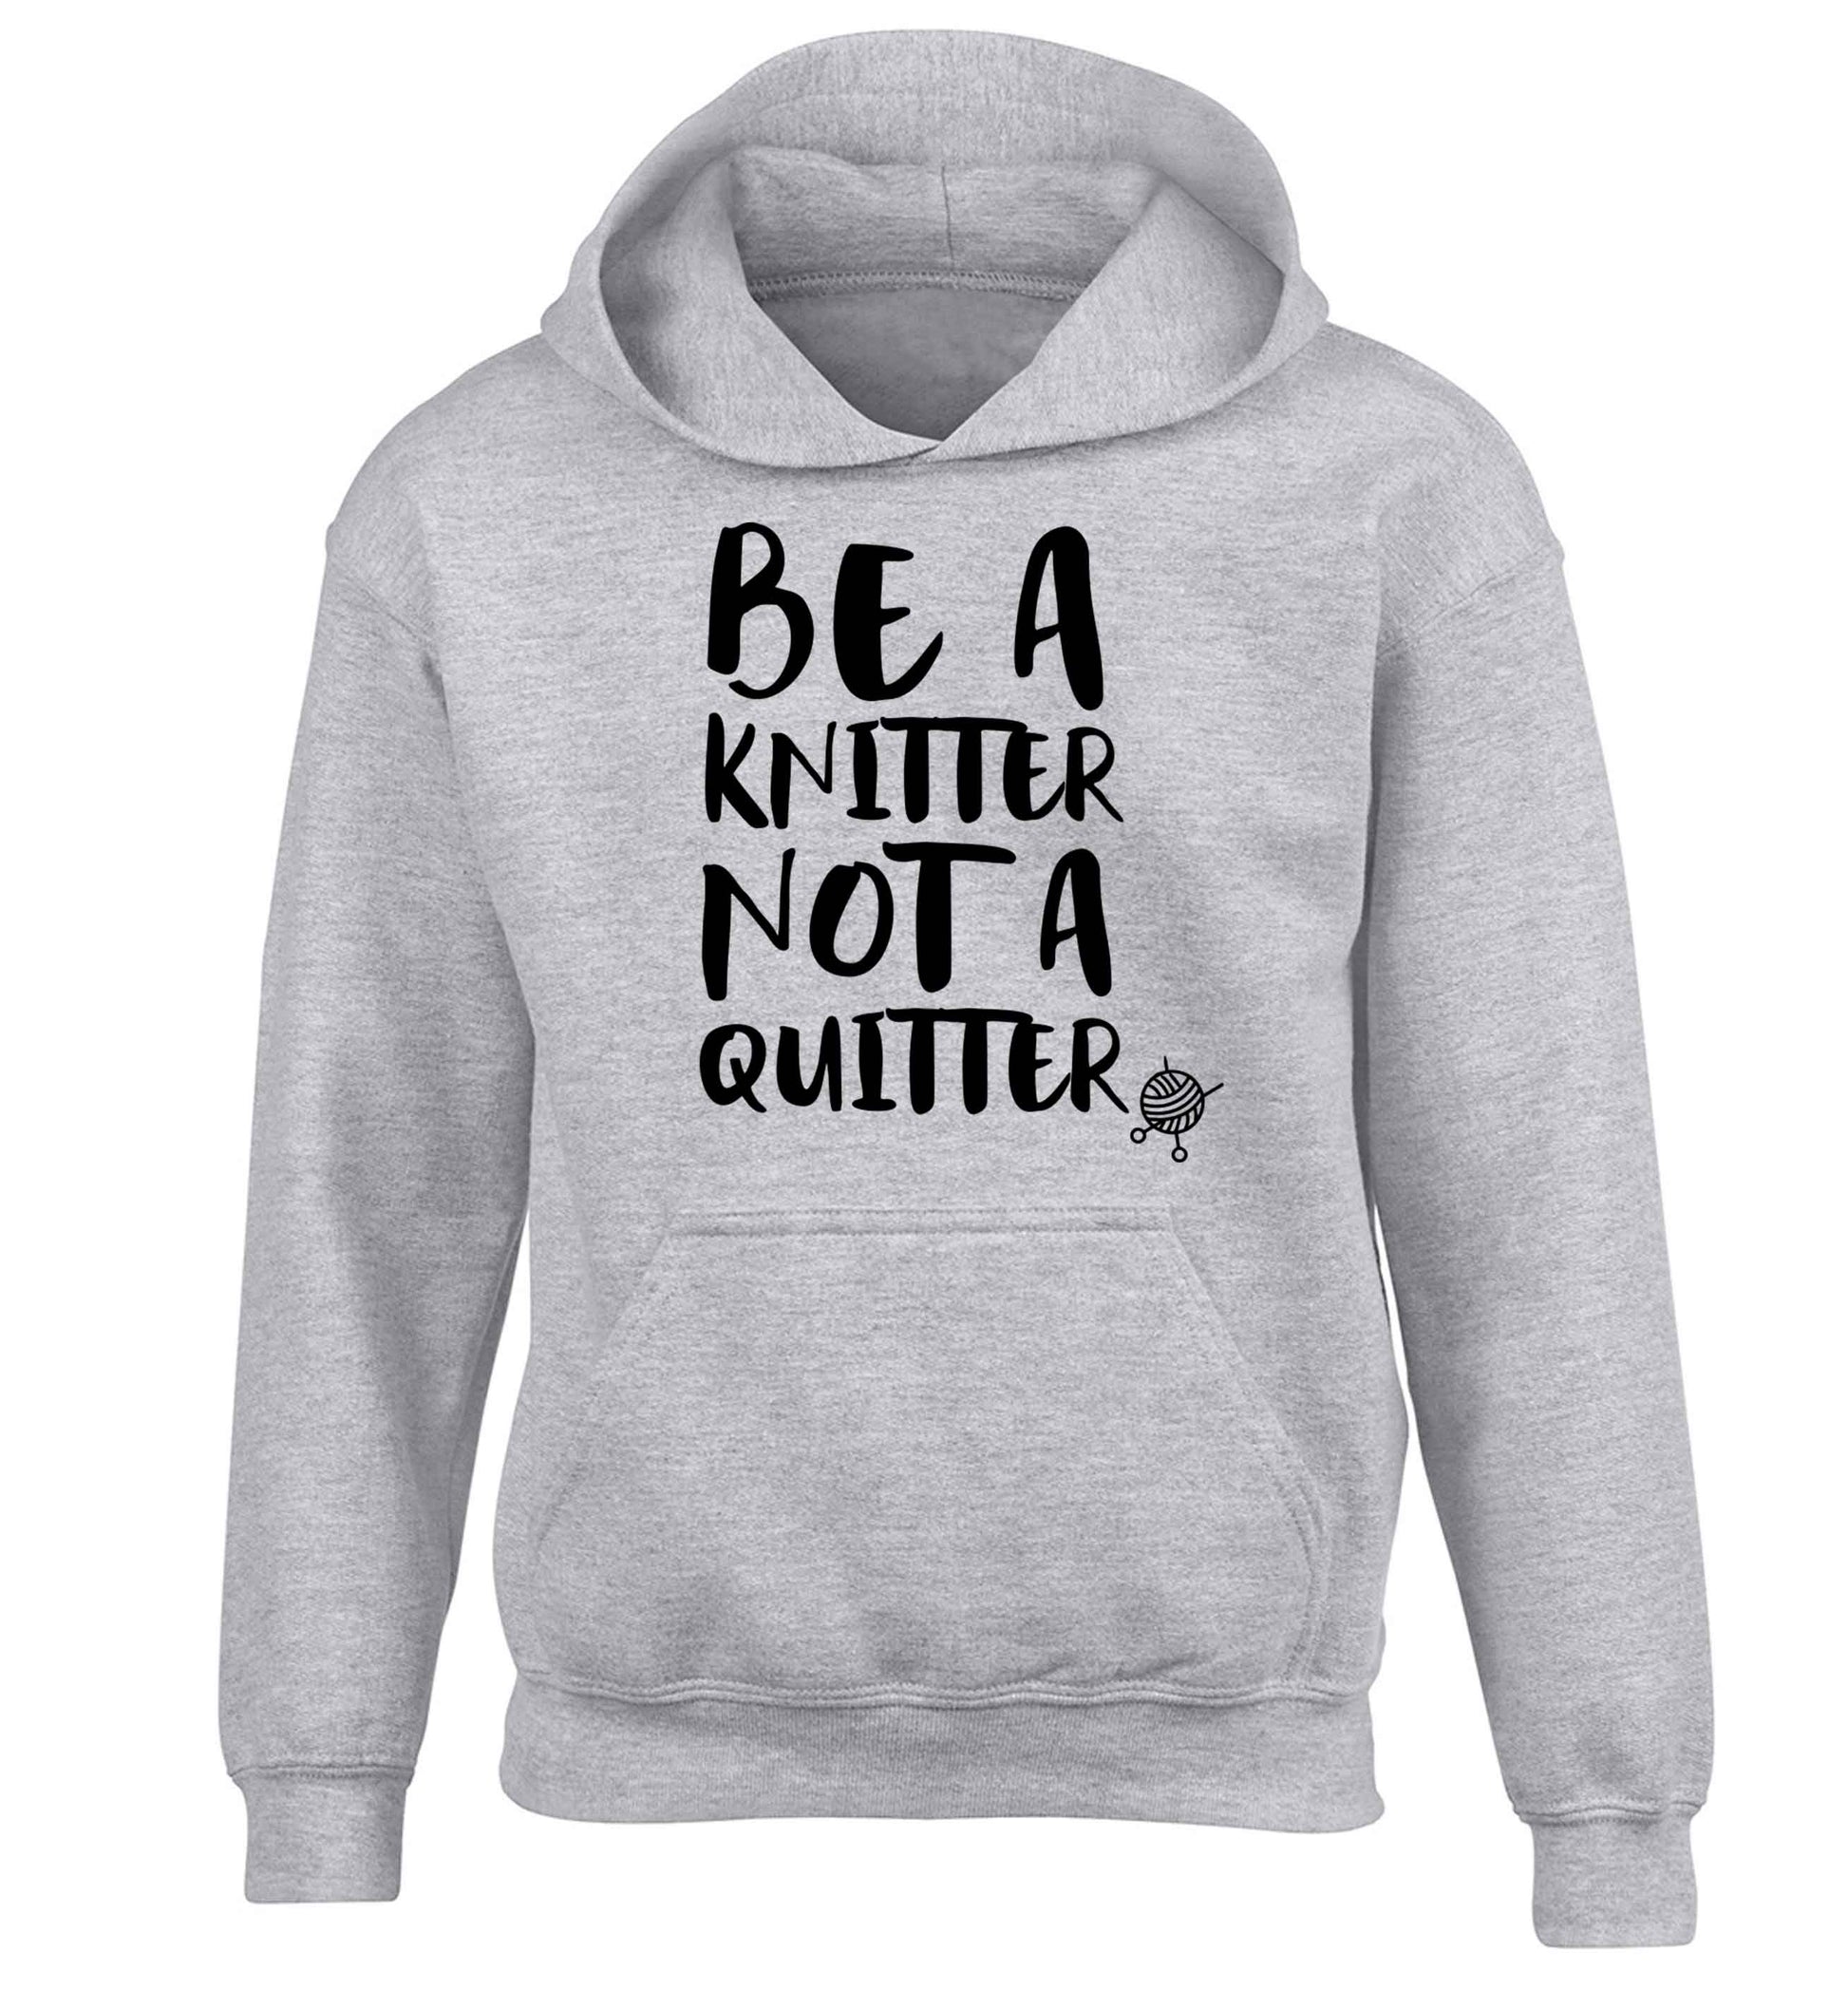 Be a knitter not a quitter children's grey hoodie 12-13 Years